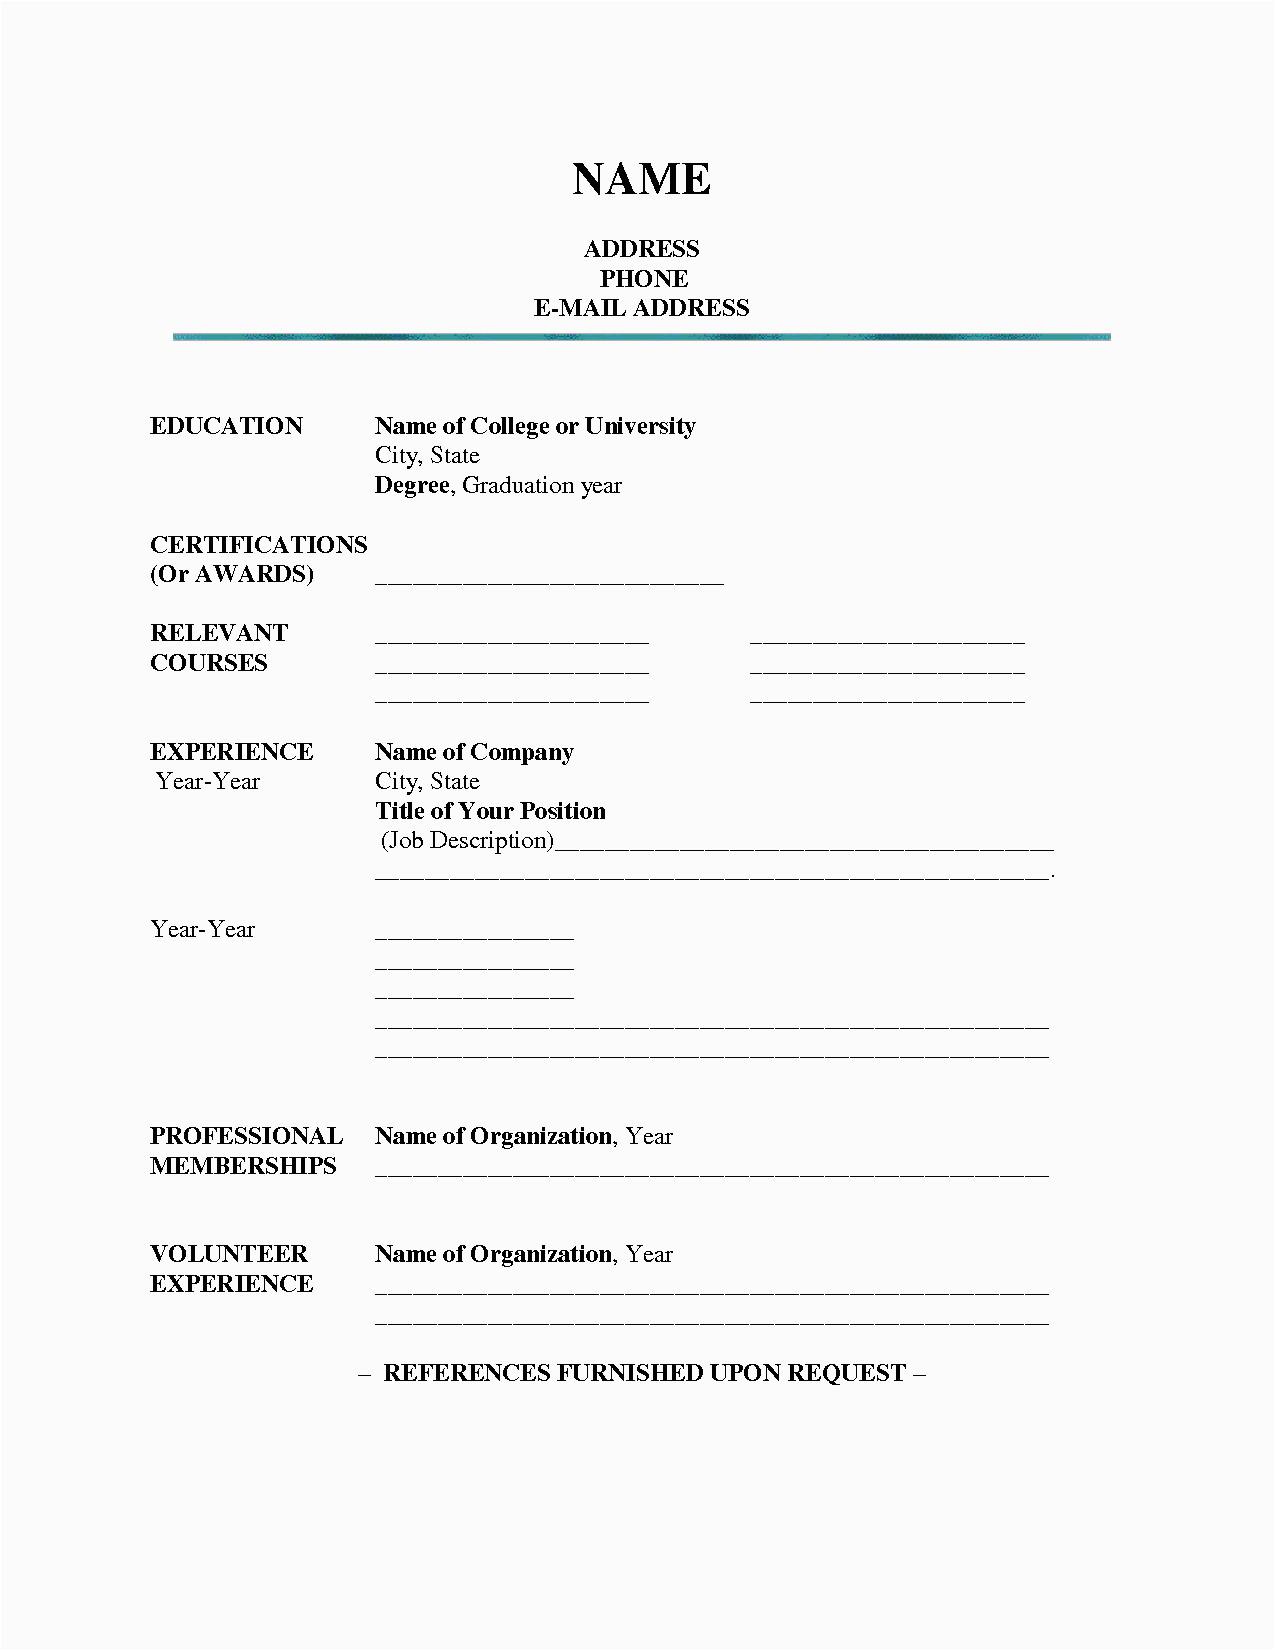 Blank Resume Template for College Students Blank Resume Templates for Students Resume Builderresume